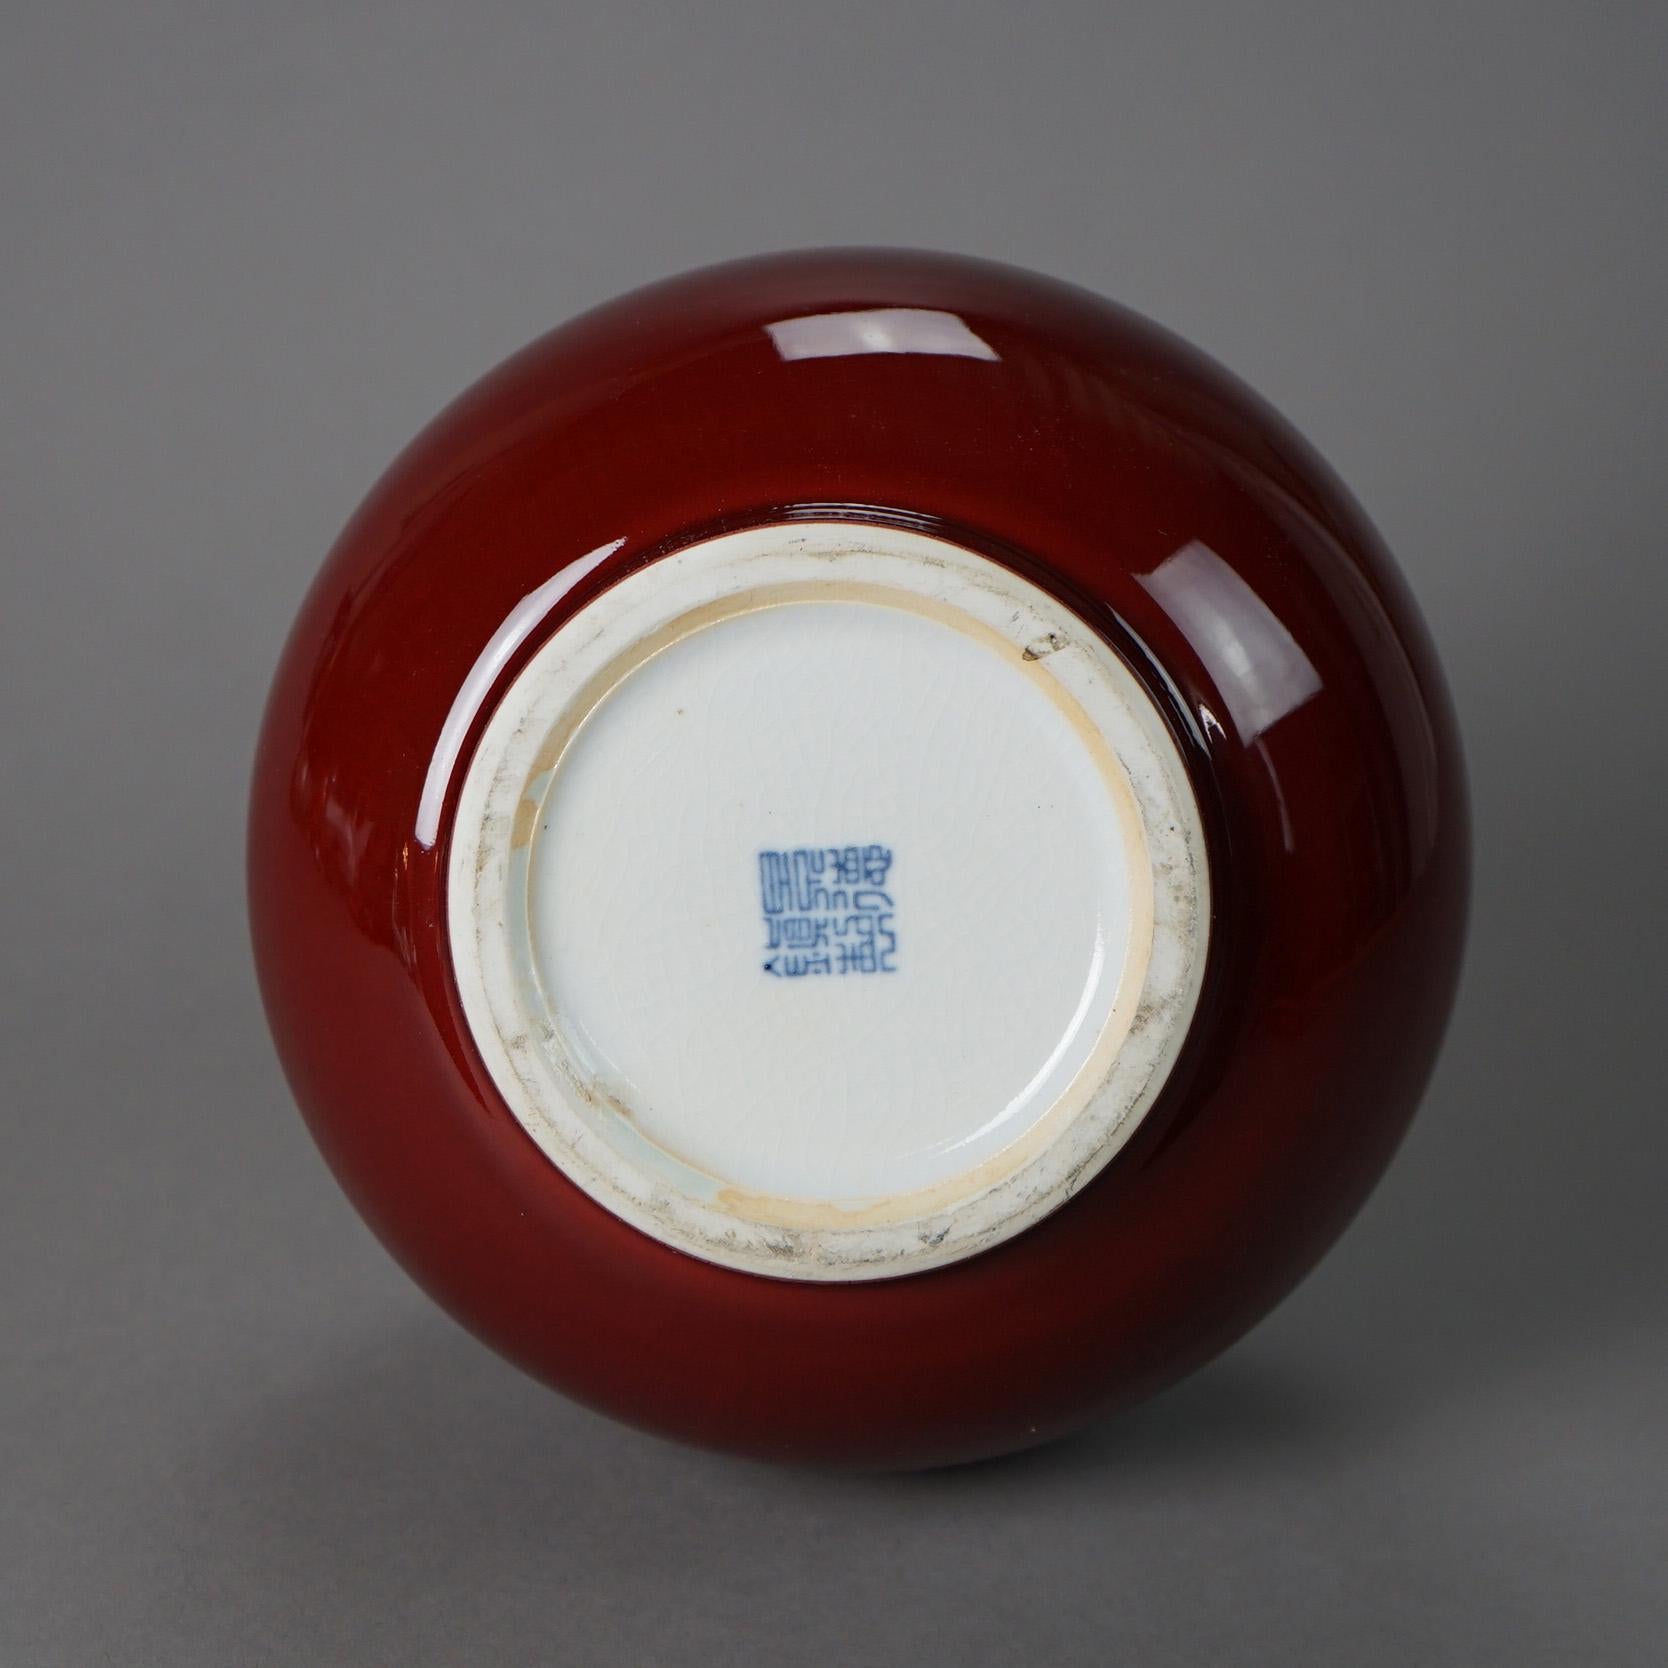 A Chinese vase offers pottery construction in bottle form with Red Flambé glaze and stamp on bottom as photographed, 20th century

Measures - 13